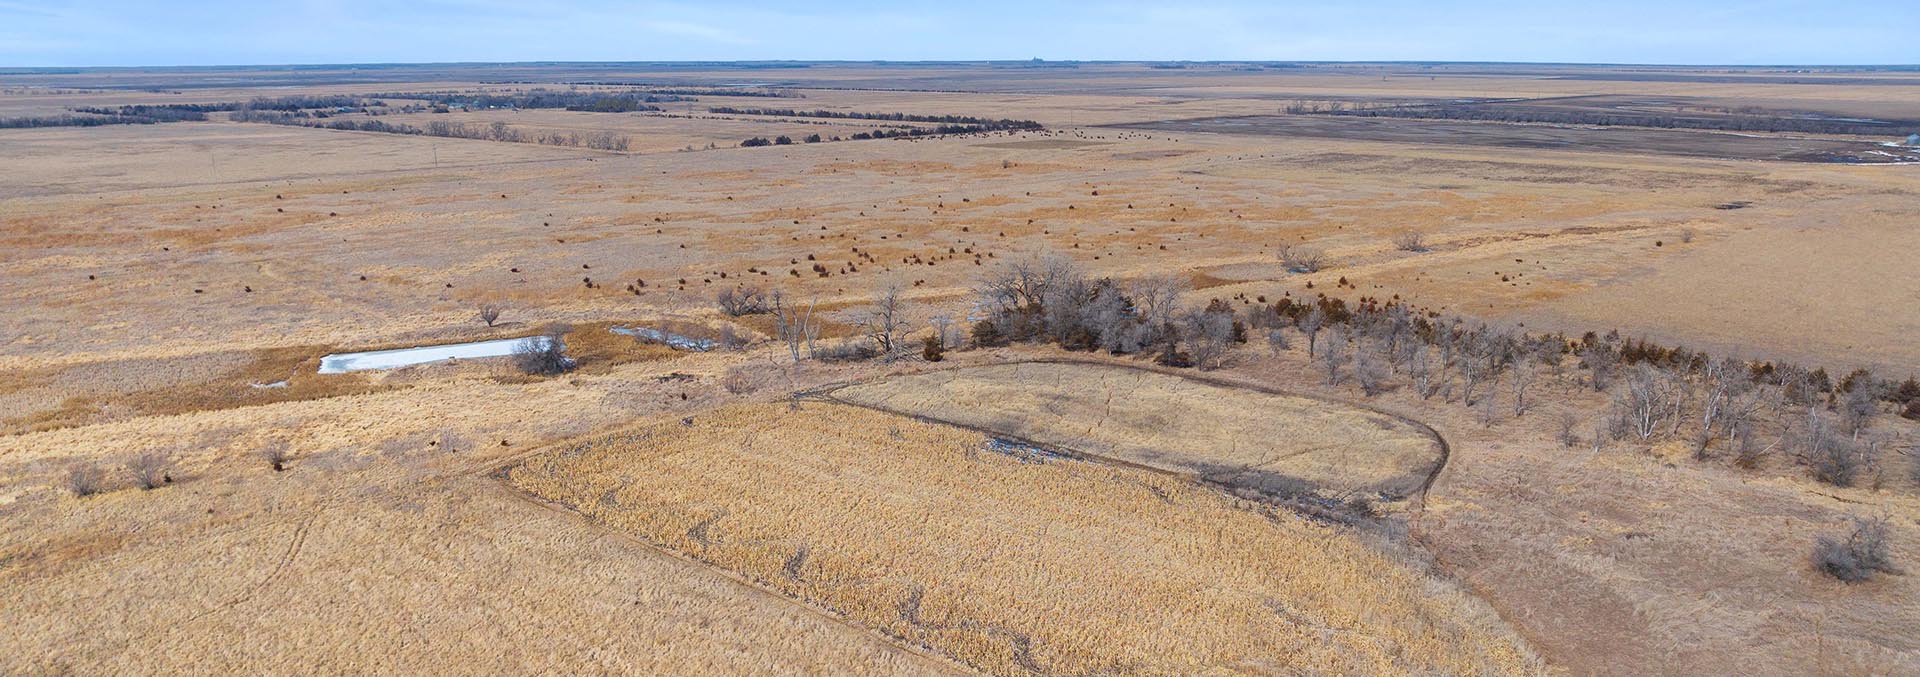 south dakota upland bird hunting property for sale spink county rooster rush